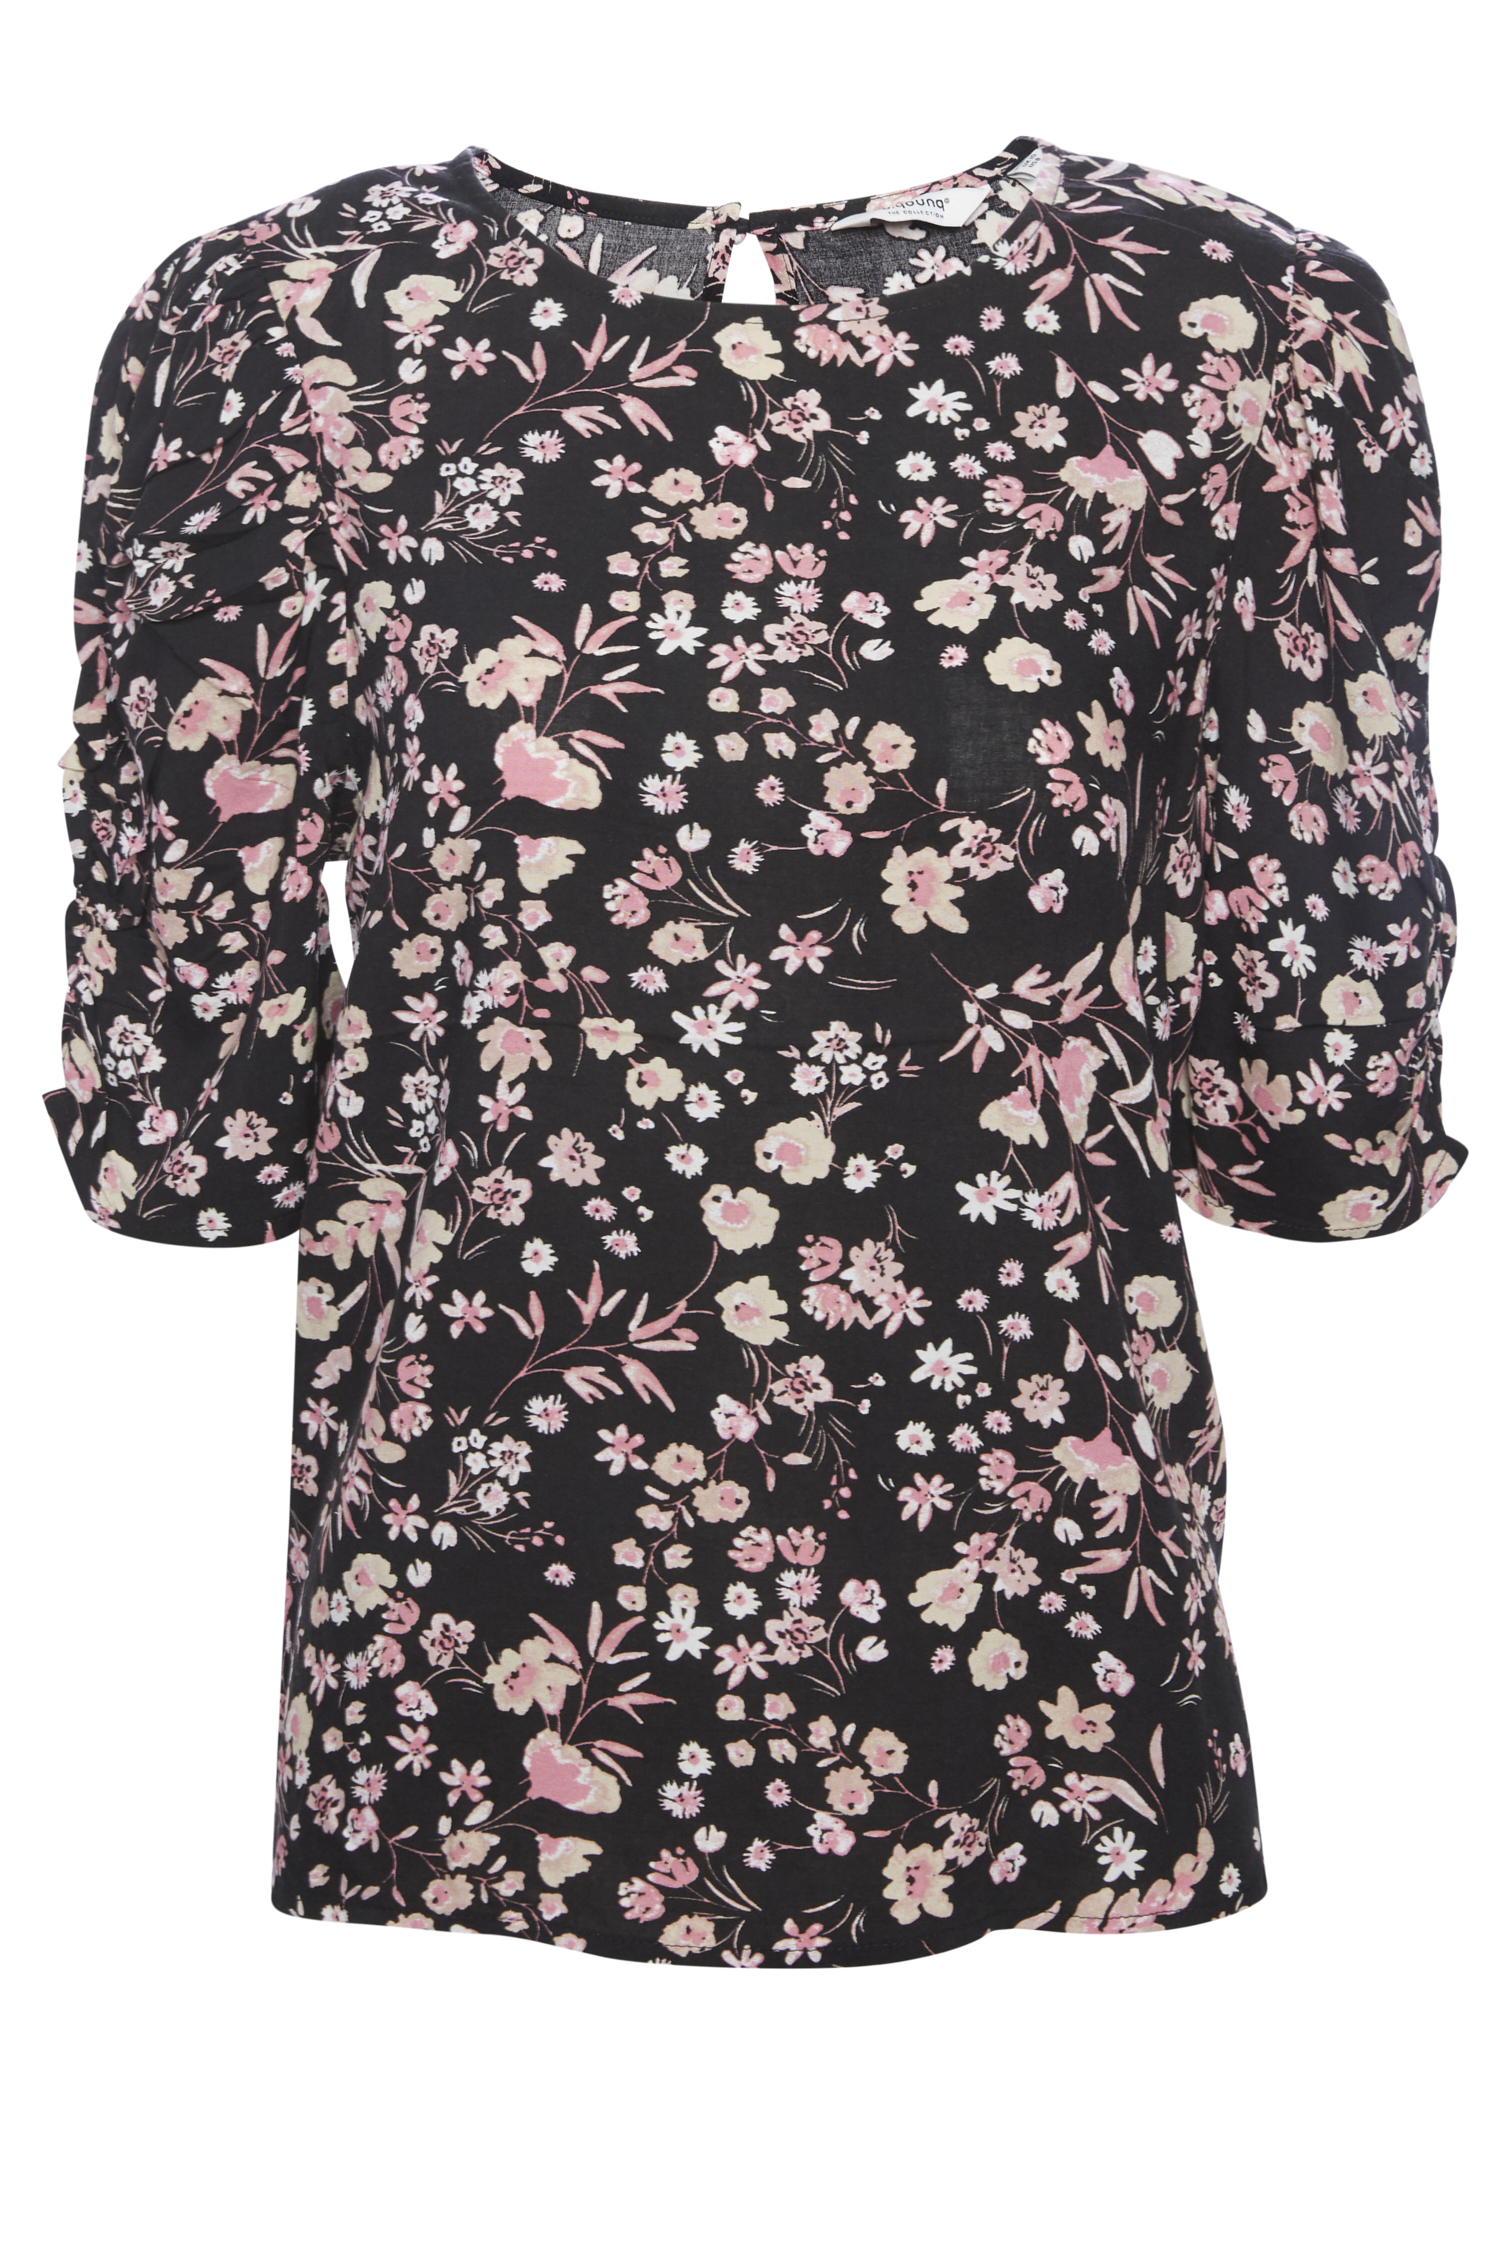 B. Young Floral Printed Blouse